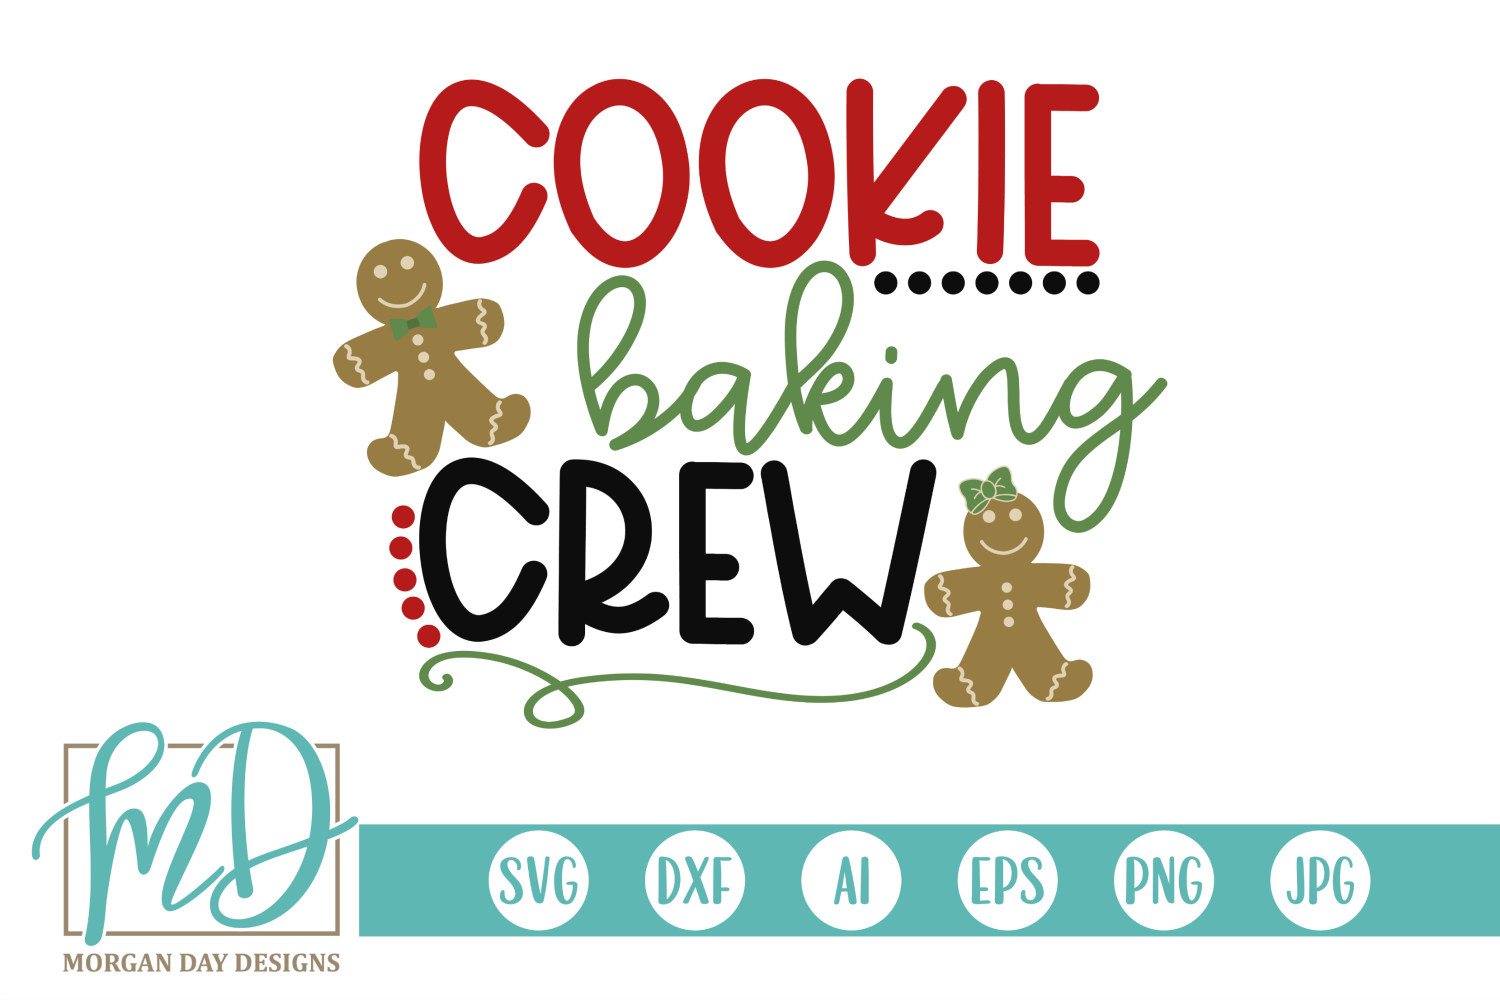 Cookie Baking Crew Svg By Morgan Day Designs Thehungryjpeg Com